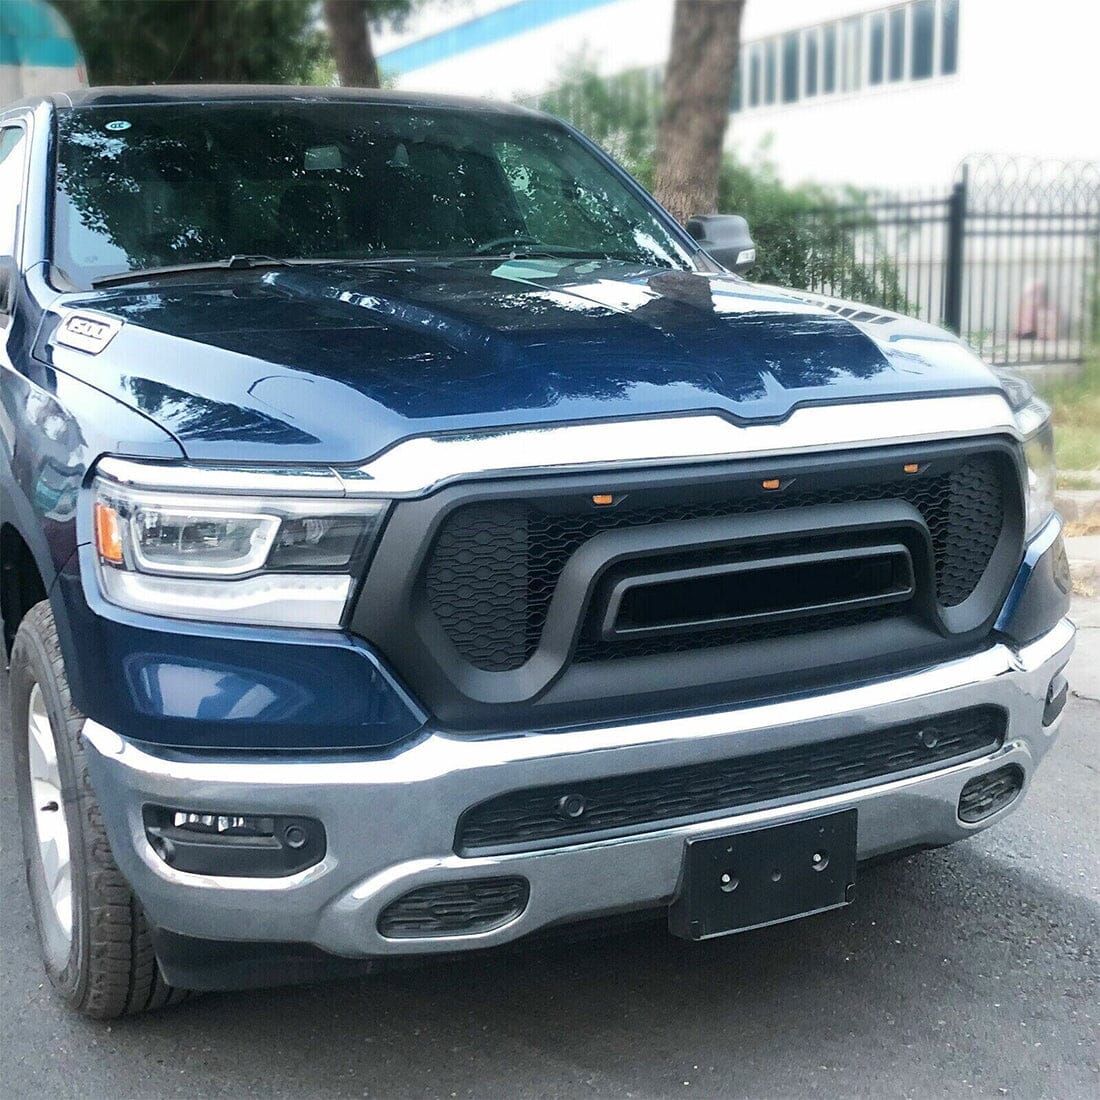 Rebel Style Front Grille W/Amber Led Lights For 2019-2020 Dodge Ram 1500 | Amoffroad